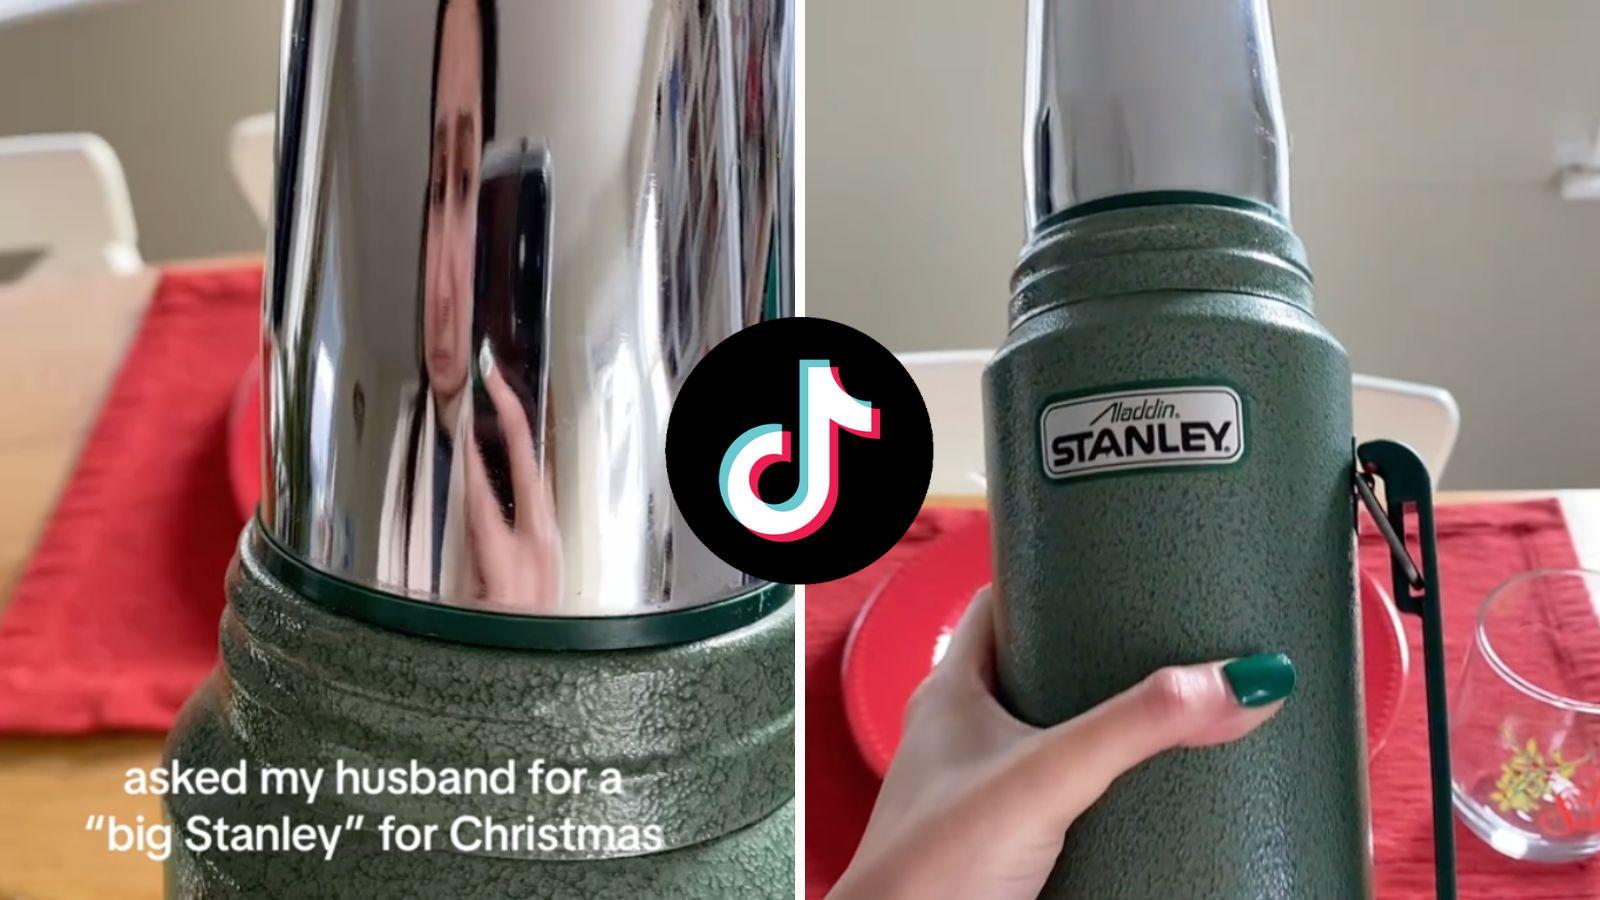 Wife slammed for complaining husband bought "wrong" Stanley cup for Christmas